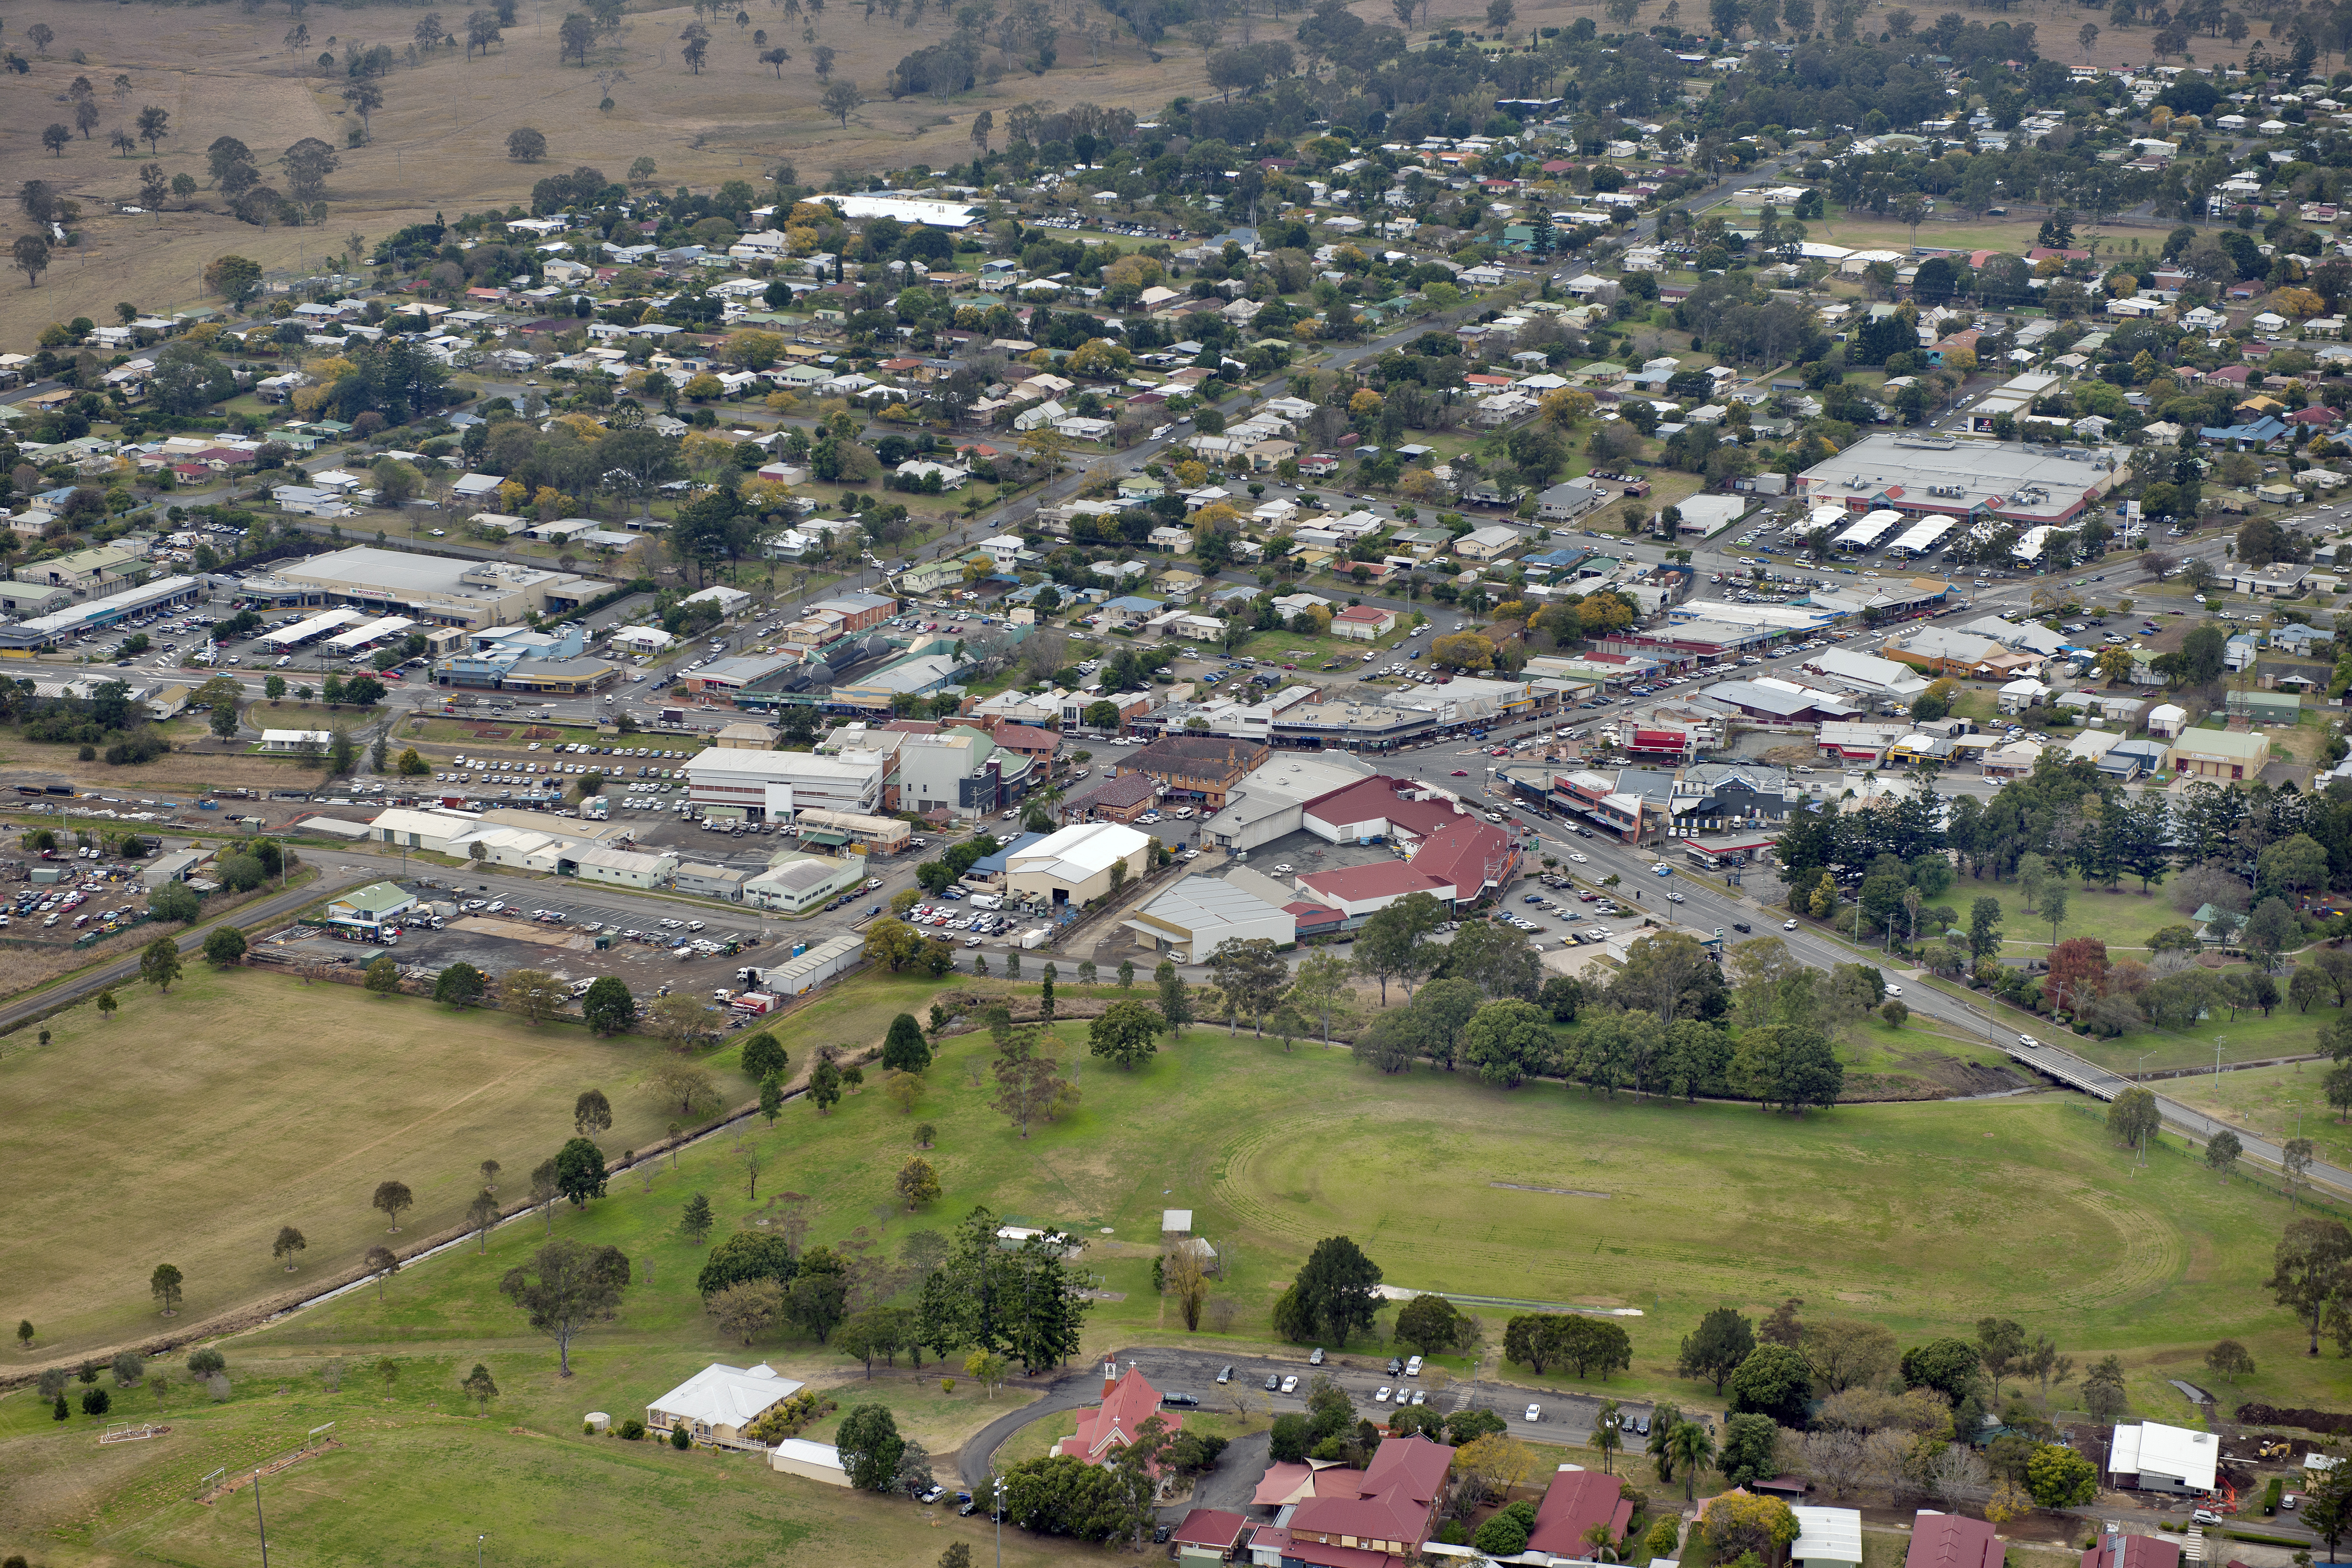 As a major centre of the Scenic Rim, Beaudesert is expected to experience significant growth over the next twenty years.